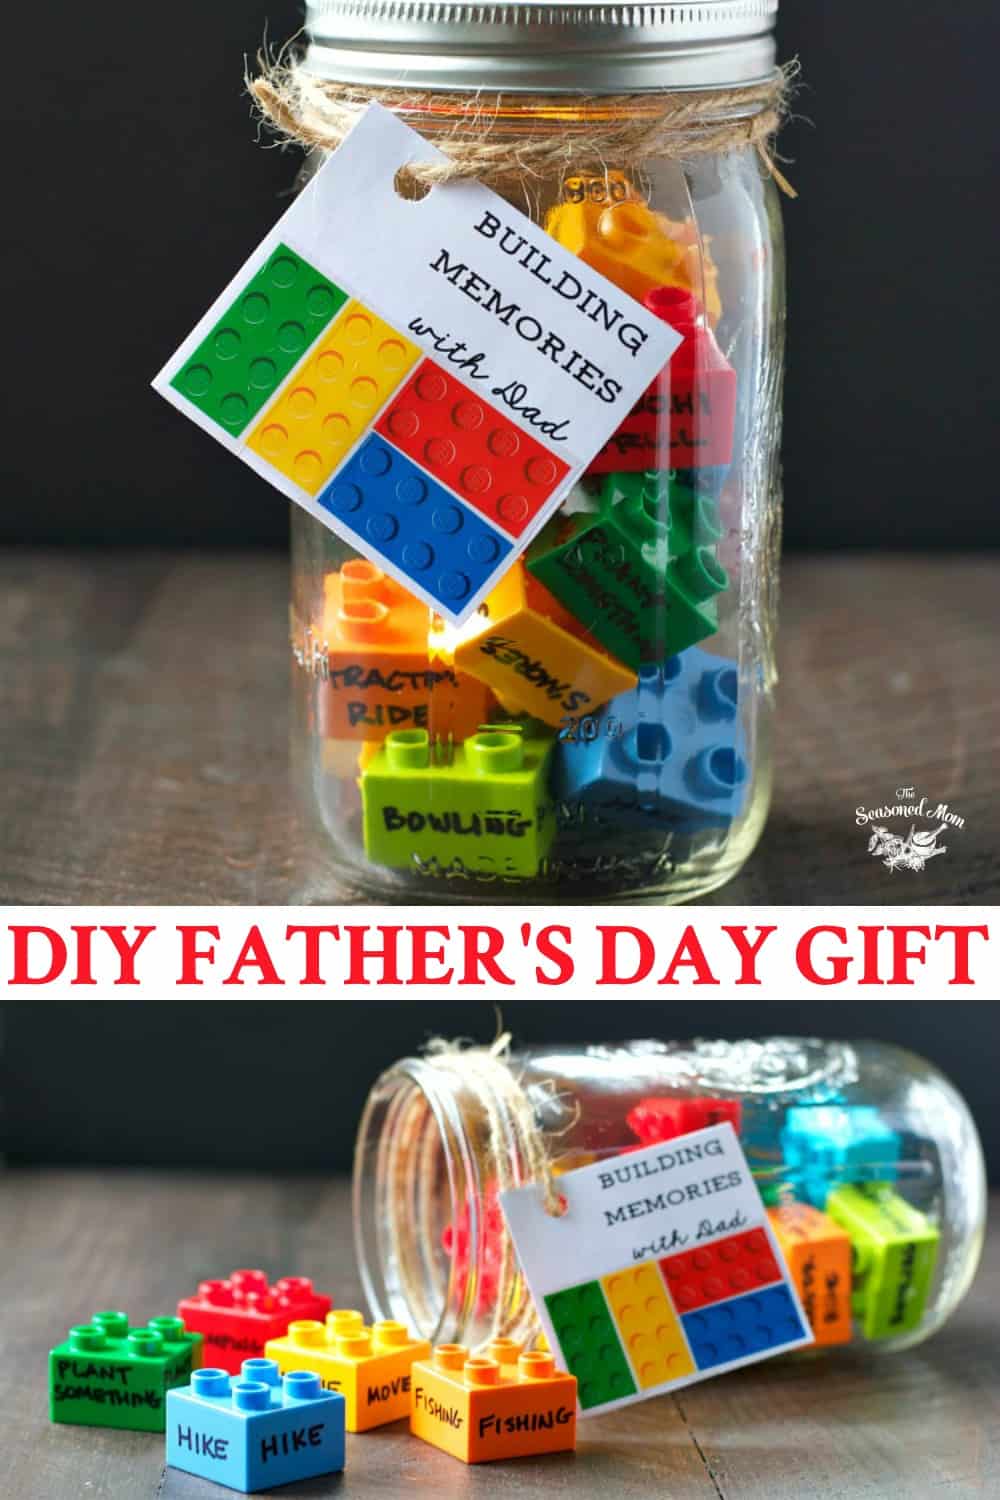 DIY Father's Day Gift: Building Memories with Dad - The Seasoned Mom